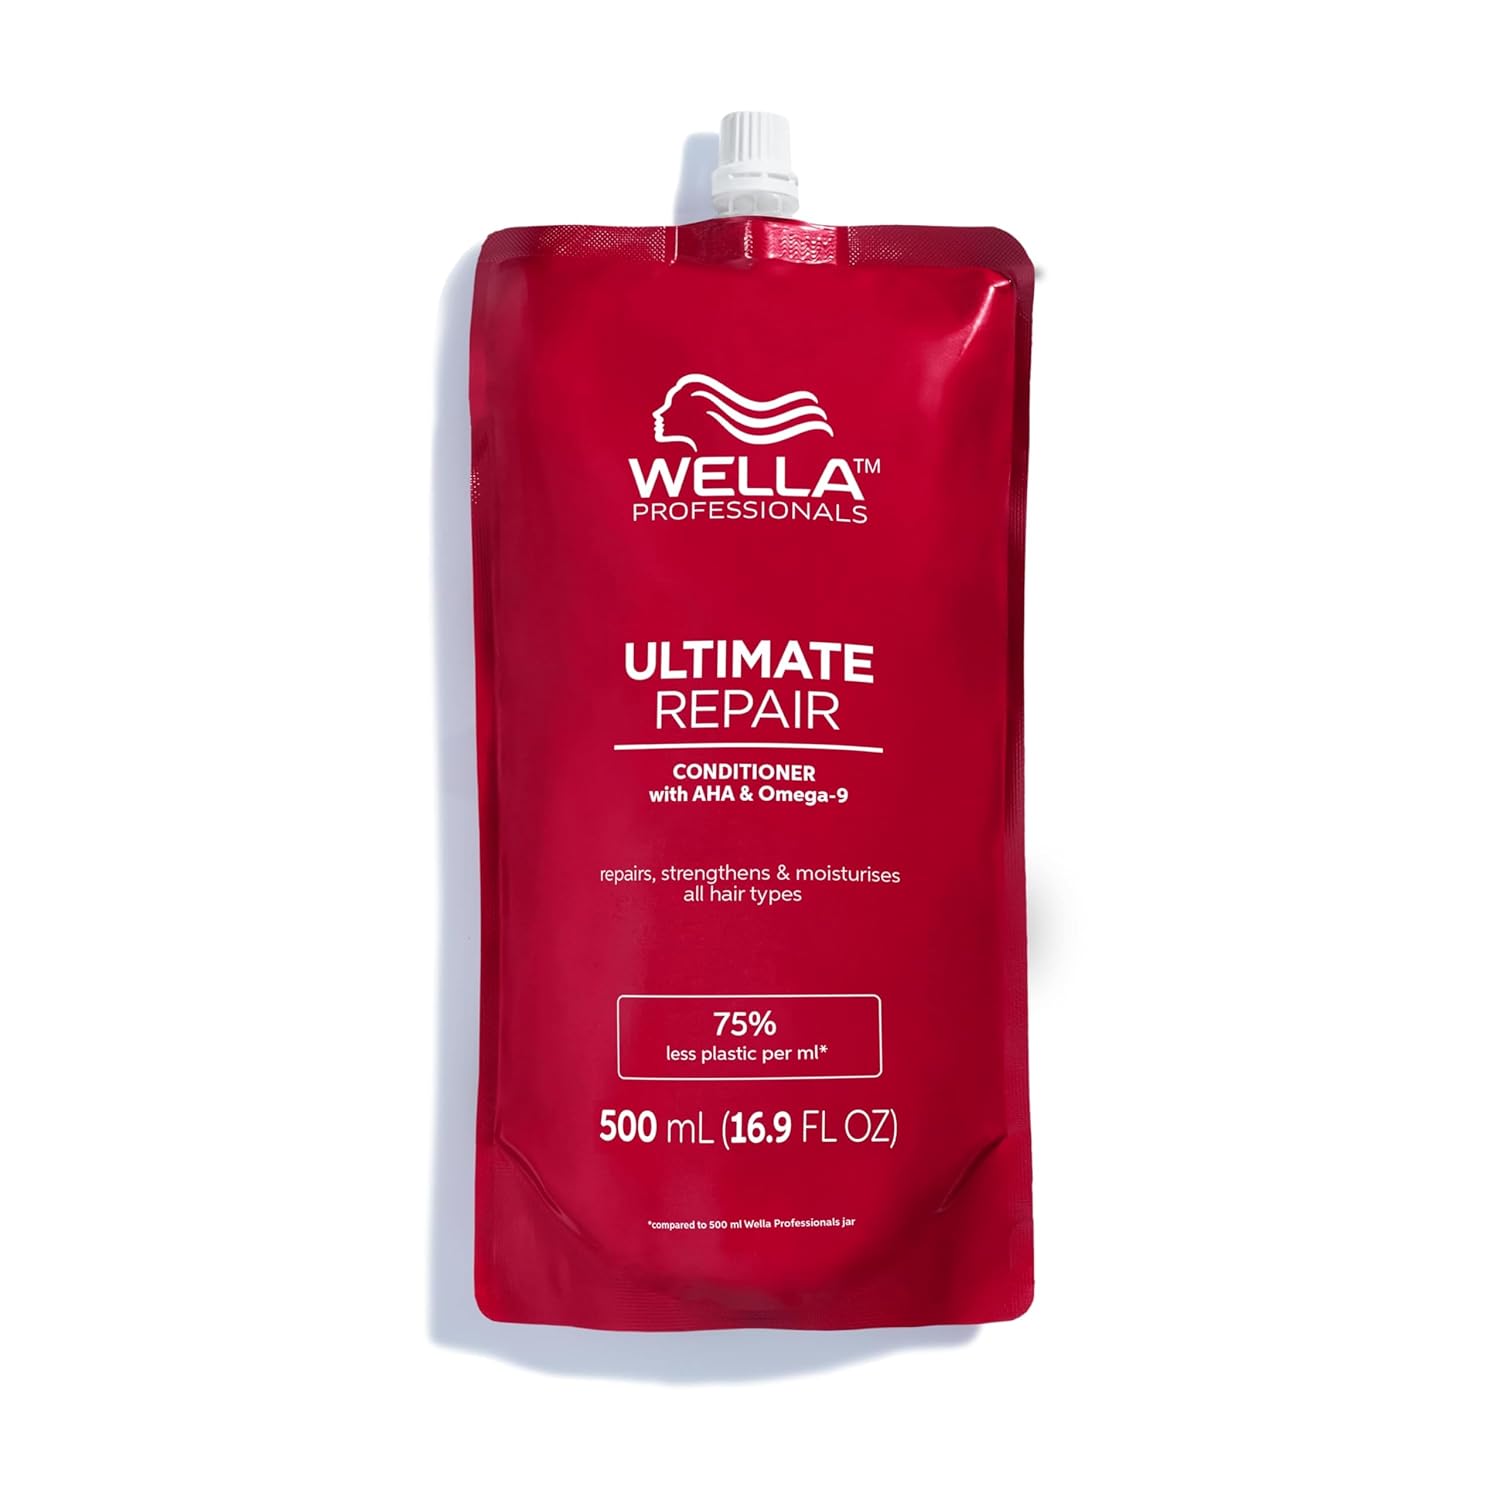 Wella Professionals ULTIMATE REPAIR Deeply Effective Conditioner Repairs, Strengthens and Moisturises All Hair Types 500ml Pouch